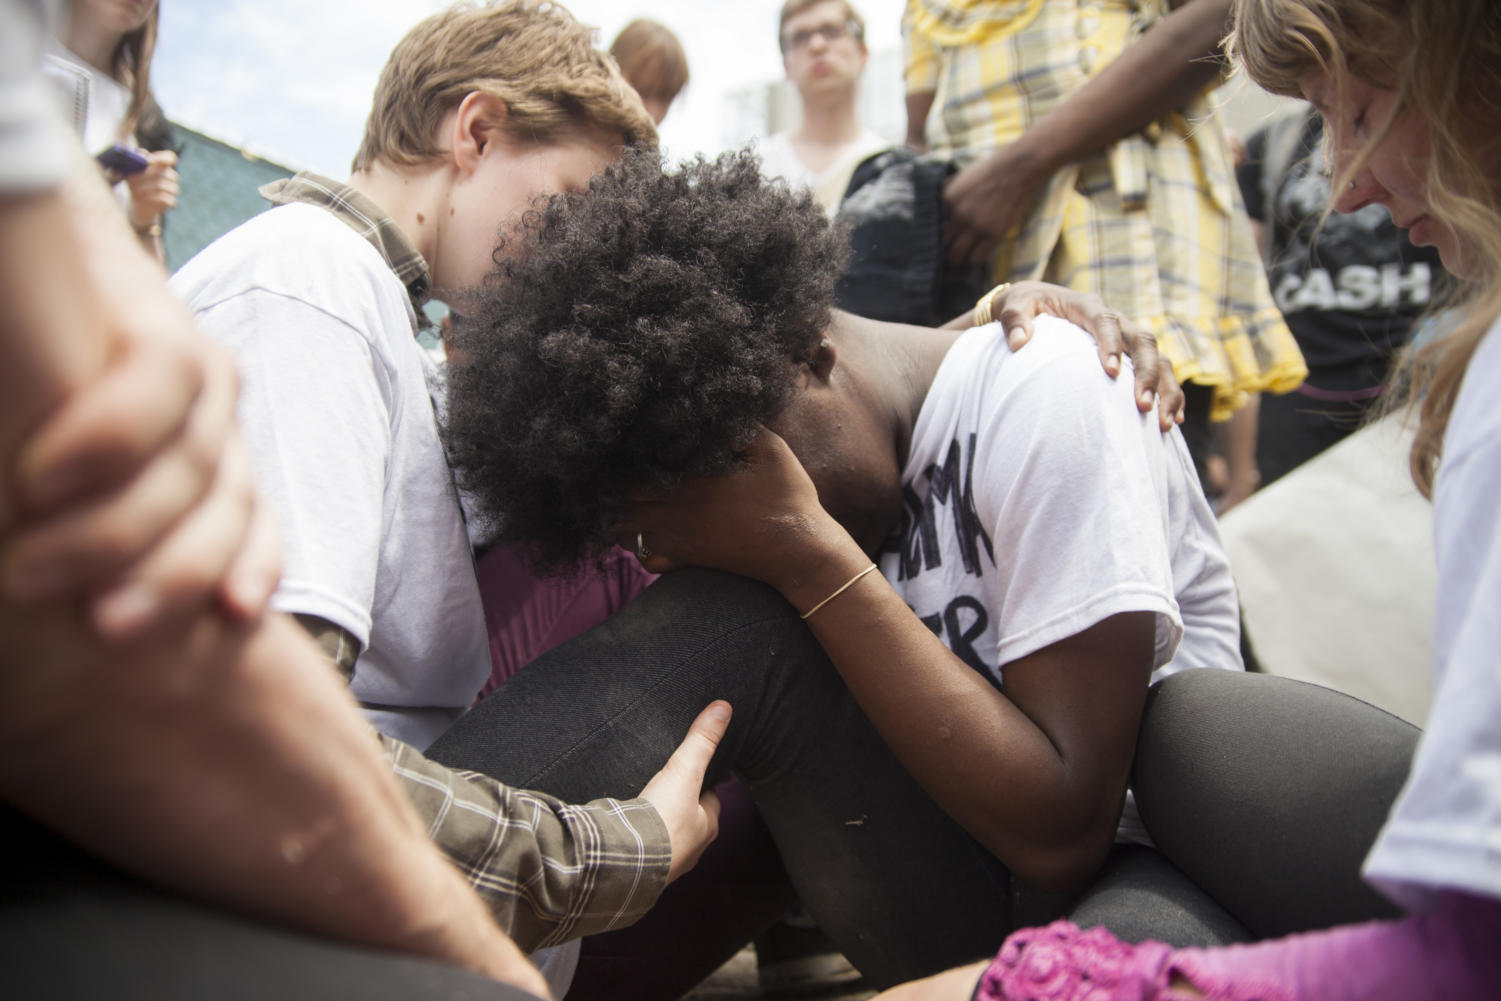 Second-year Kayli Horne (left) comforts FLY member Tori Crider after the day's protest came to an end.